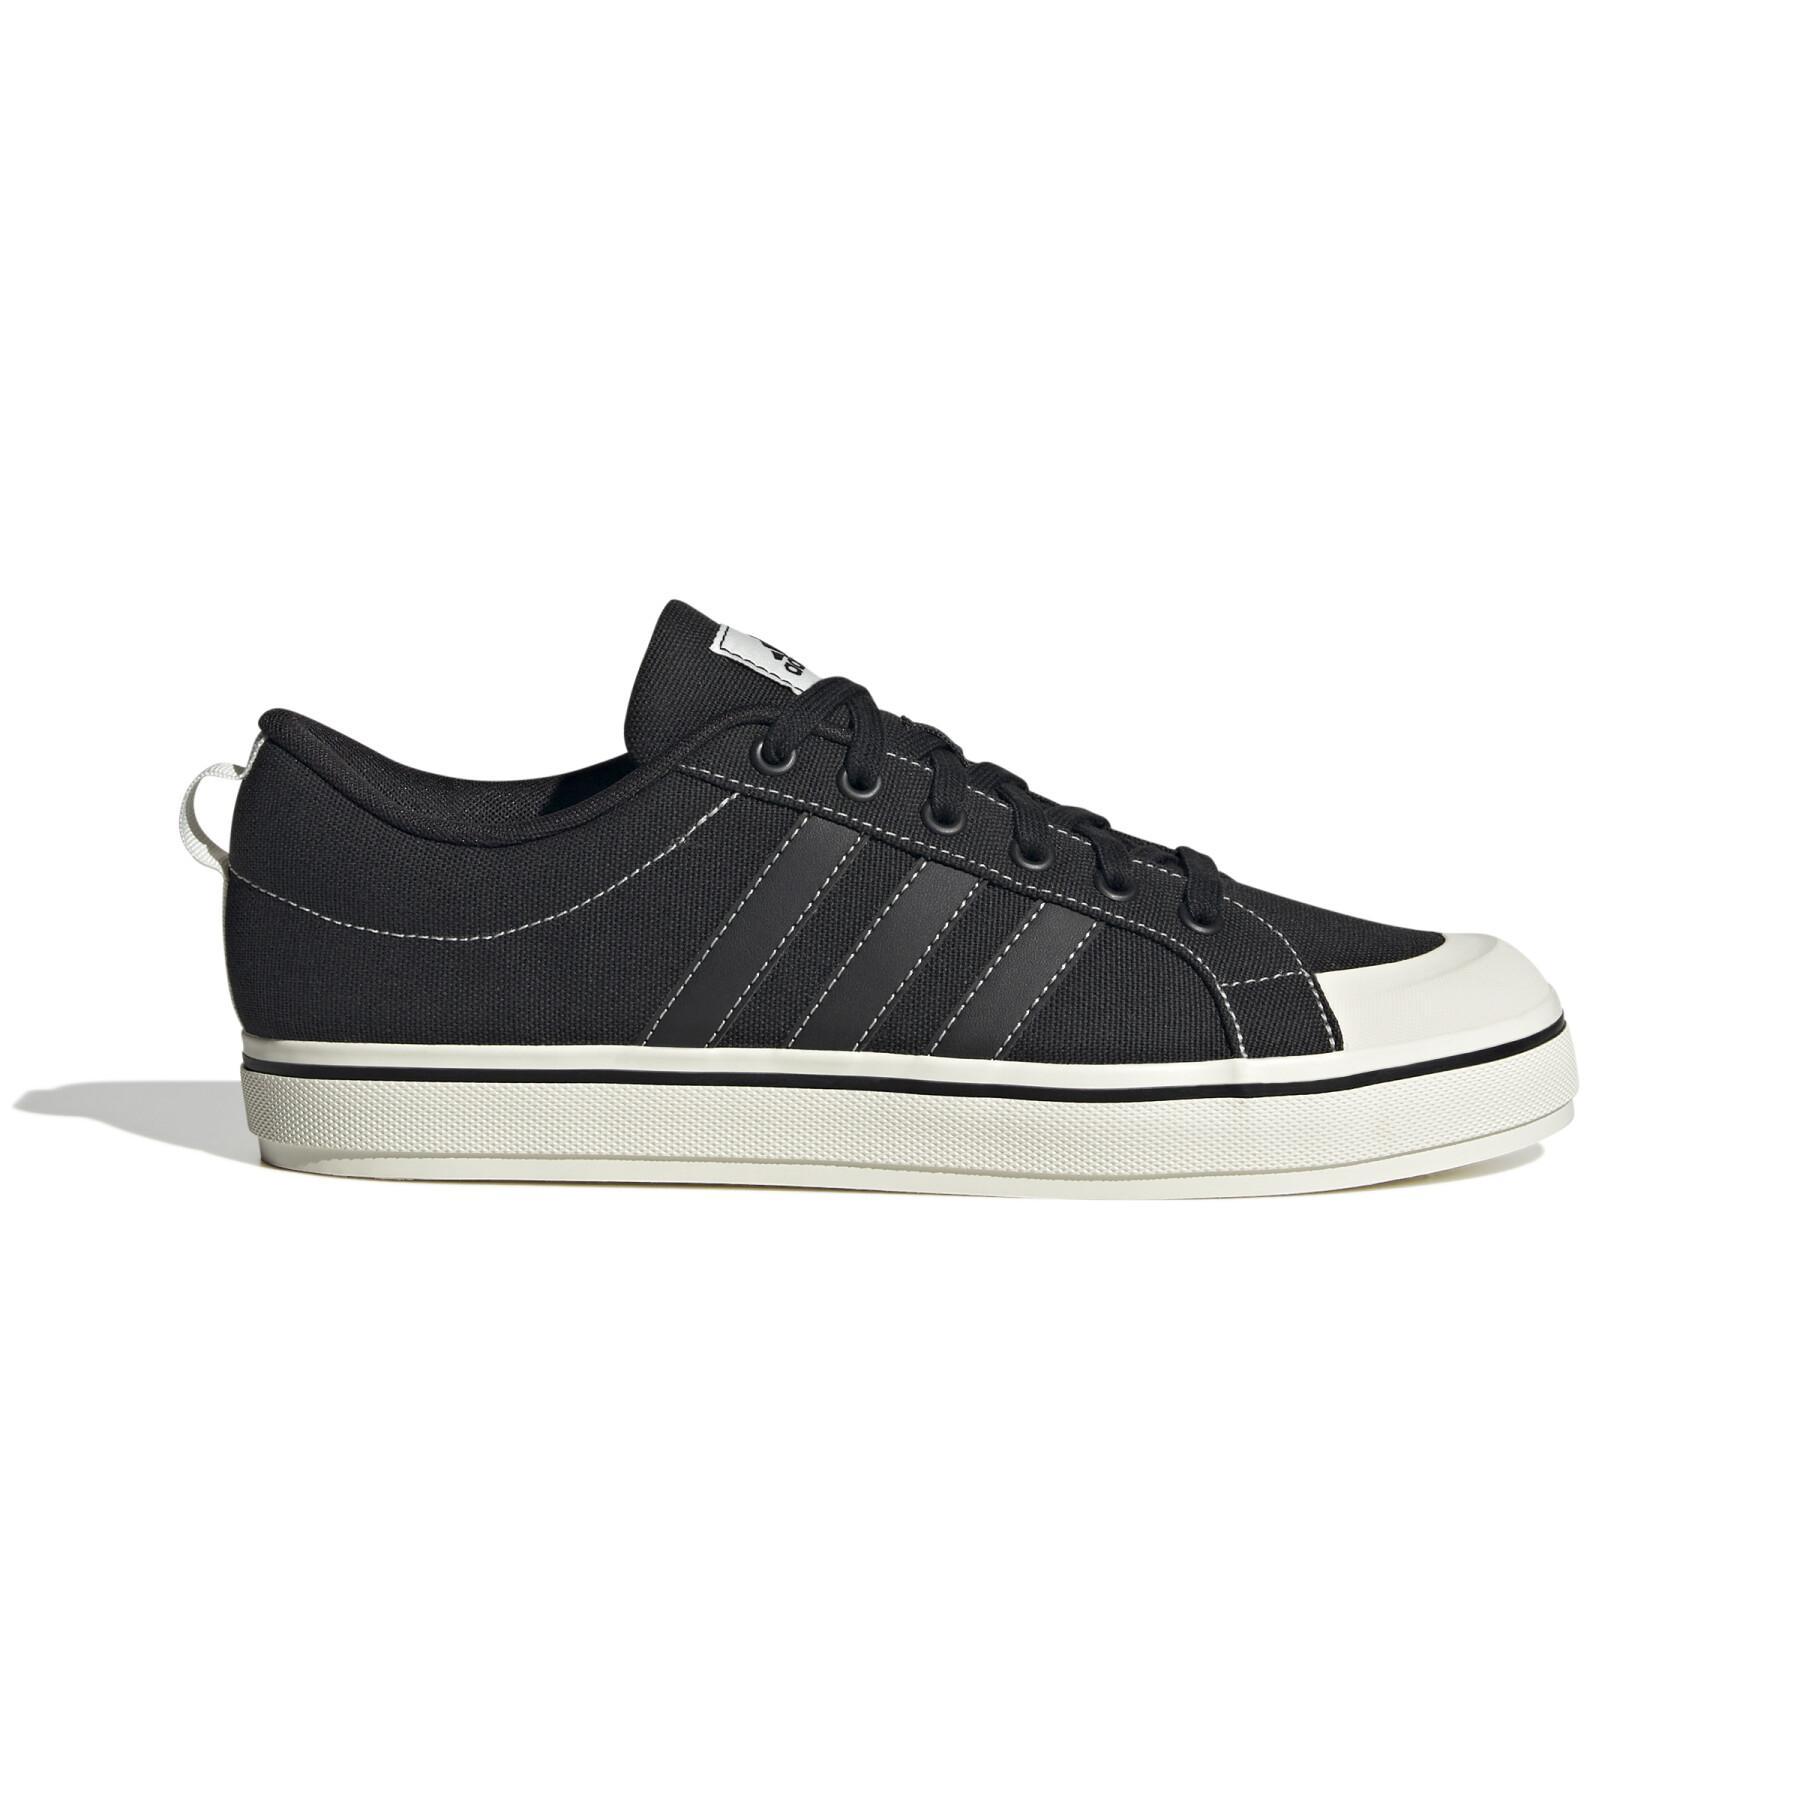 https://media.foot-store.com/catalog/product/cache/image/1800x/9df78eab33525d08d6e5fb8d27136e95/a/d/adidas_hp6020_1_footwear_photography_side_lateral_center_view_white_000.jpg